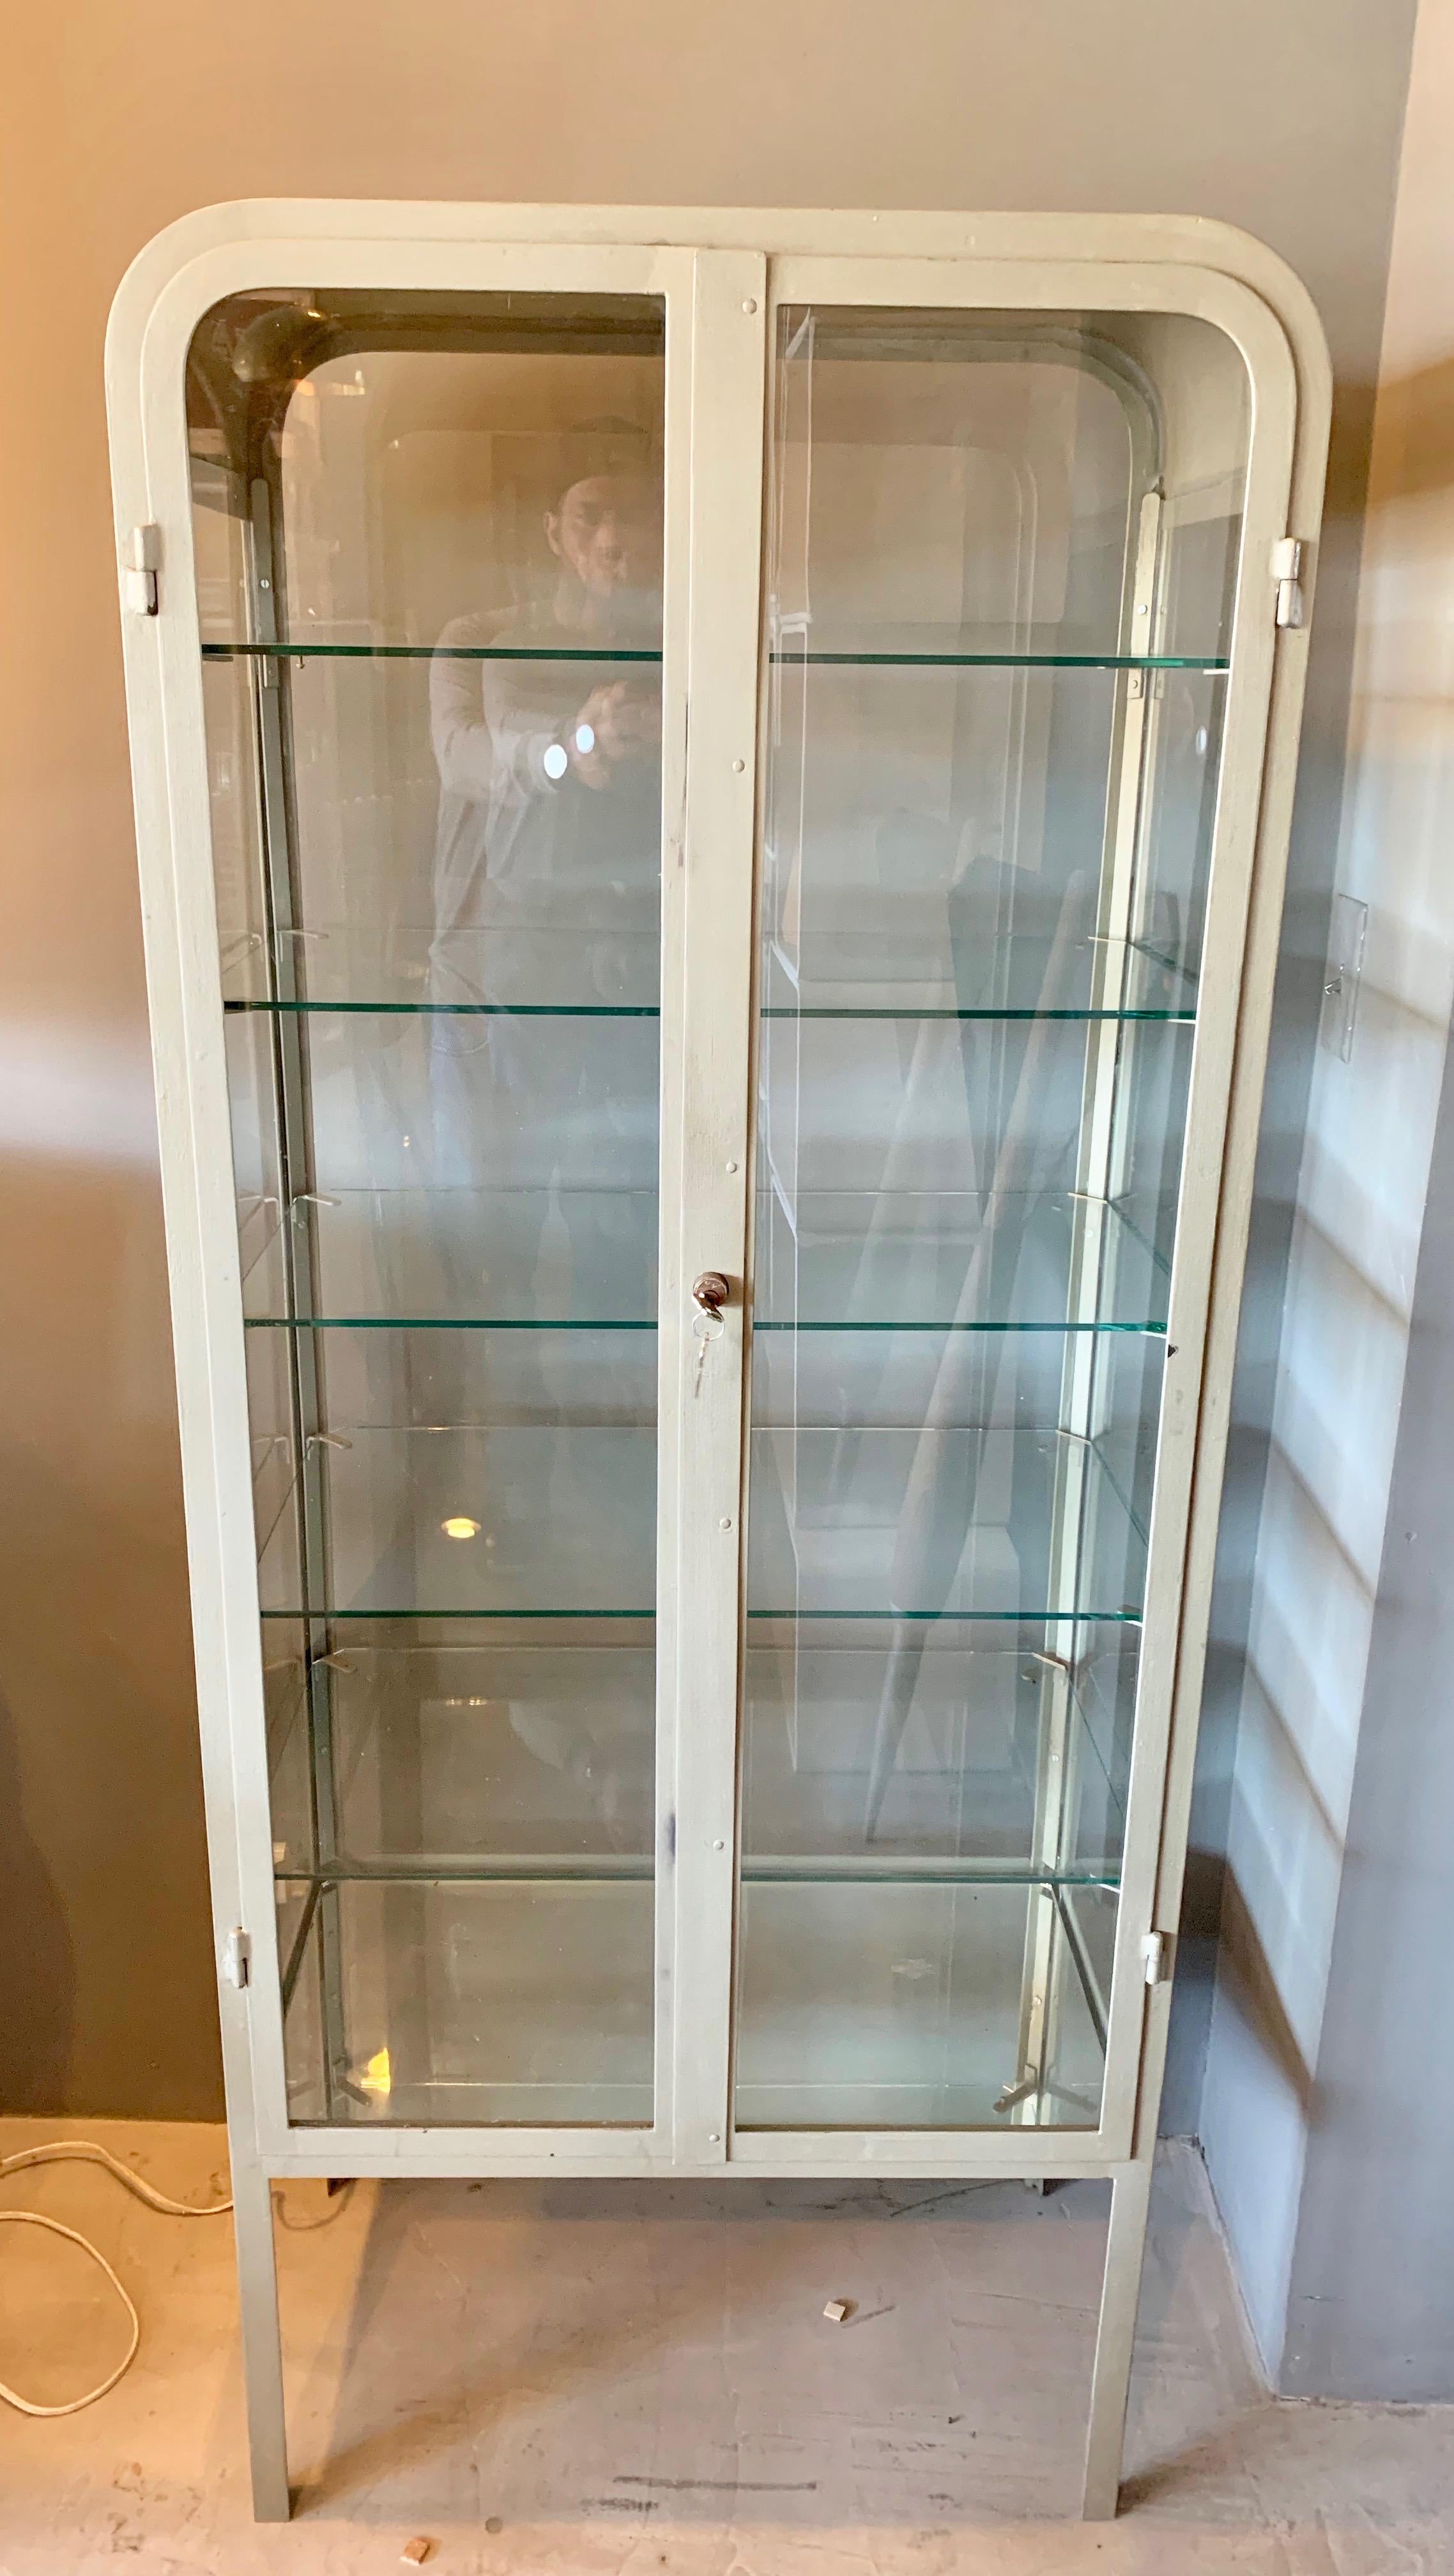 Handsome two-door iron and glass vitrine from Buenos Aires, circa 1930. Great vintage condition. Original working lock with 5 tempered glass shelves and antique mirror bottom. Back of display is also clear glass. Awesome display cabinet. 